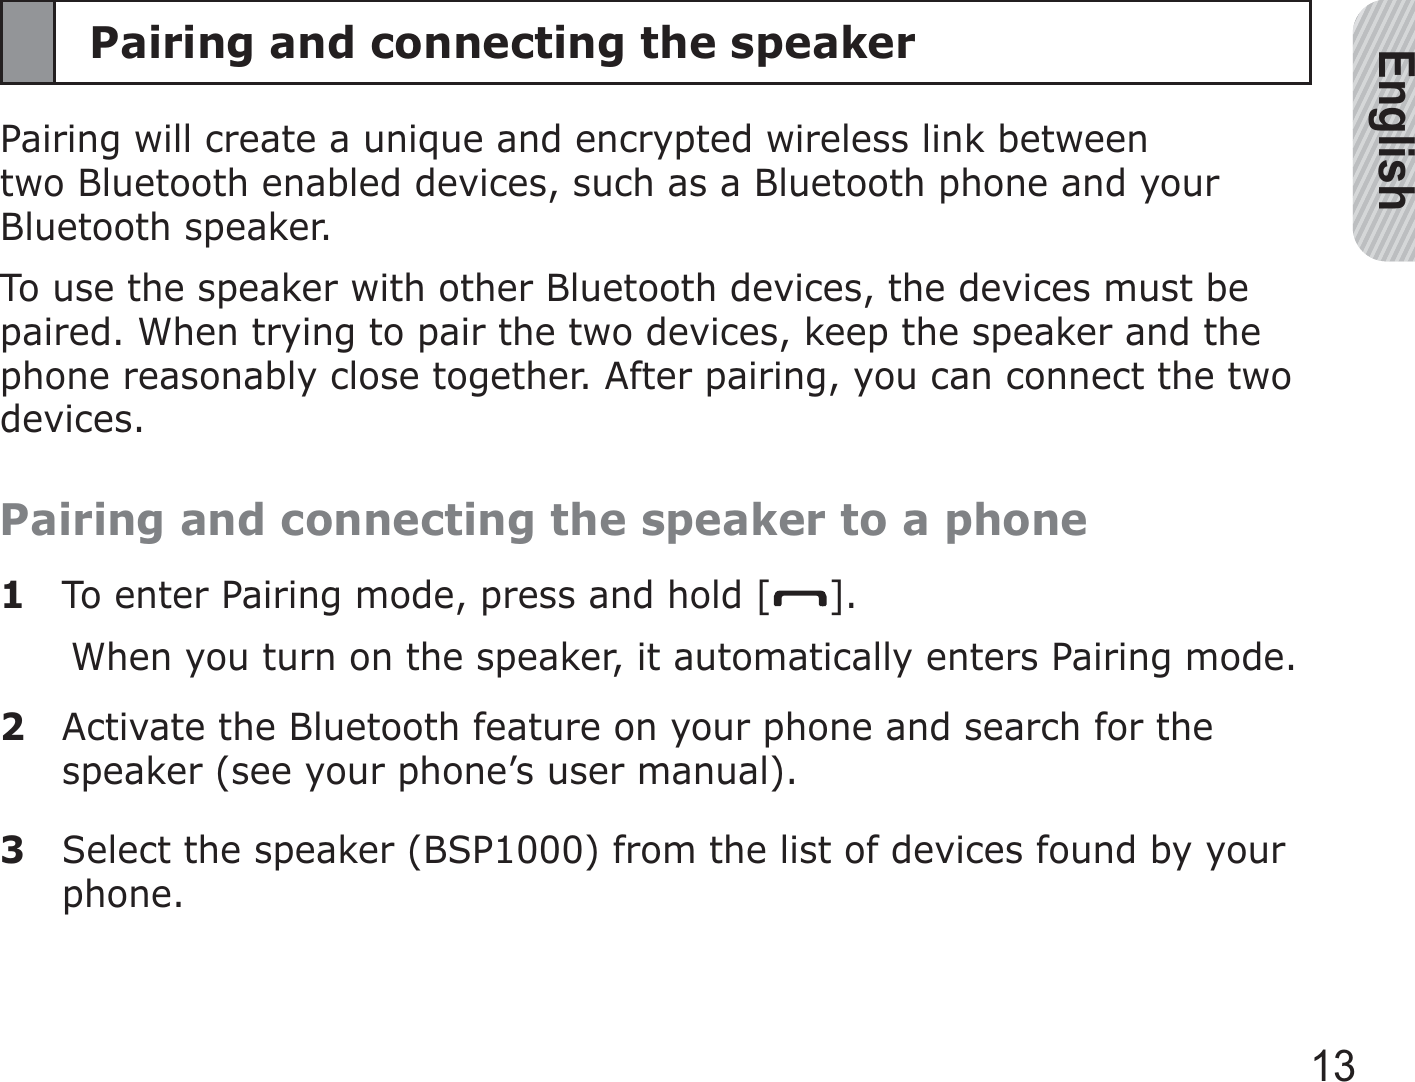 English13Pairing and connecting the speakerPairing will create a unique and encrypted wireless link between two Bluetooth enabled devices, such as a Bluetooth phone and your Bluetooth speaker.To use the speaker with other Bluetooth devices, the devices must be paired. When trying to pair the two devices, keep the speaker and the phone reasonably close together. After pairing, you can connect the two devices.Pairing and connecting the speaker to a phone1  To enter Pairing mode, press and hold [ ].When you turn on the speaker, it automatically enters Pairing mode.2  Activate the Bluetooth feature on your phone and search for the speaker (see your phone’s user manual).3  Select the speaker (BSP1000) from the list of devices found by your phone.